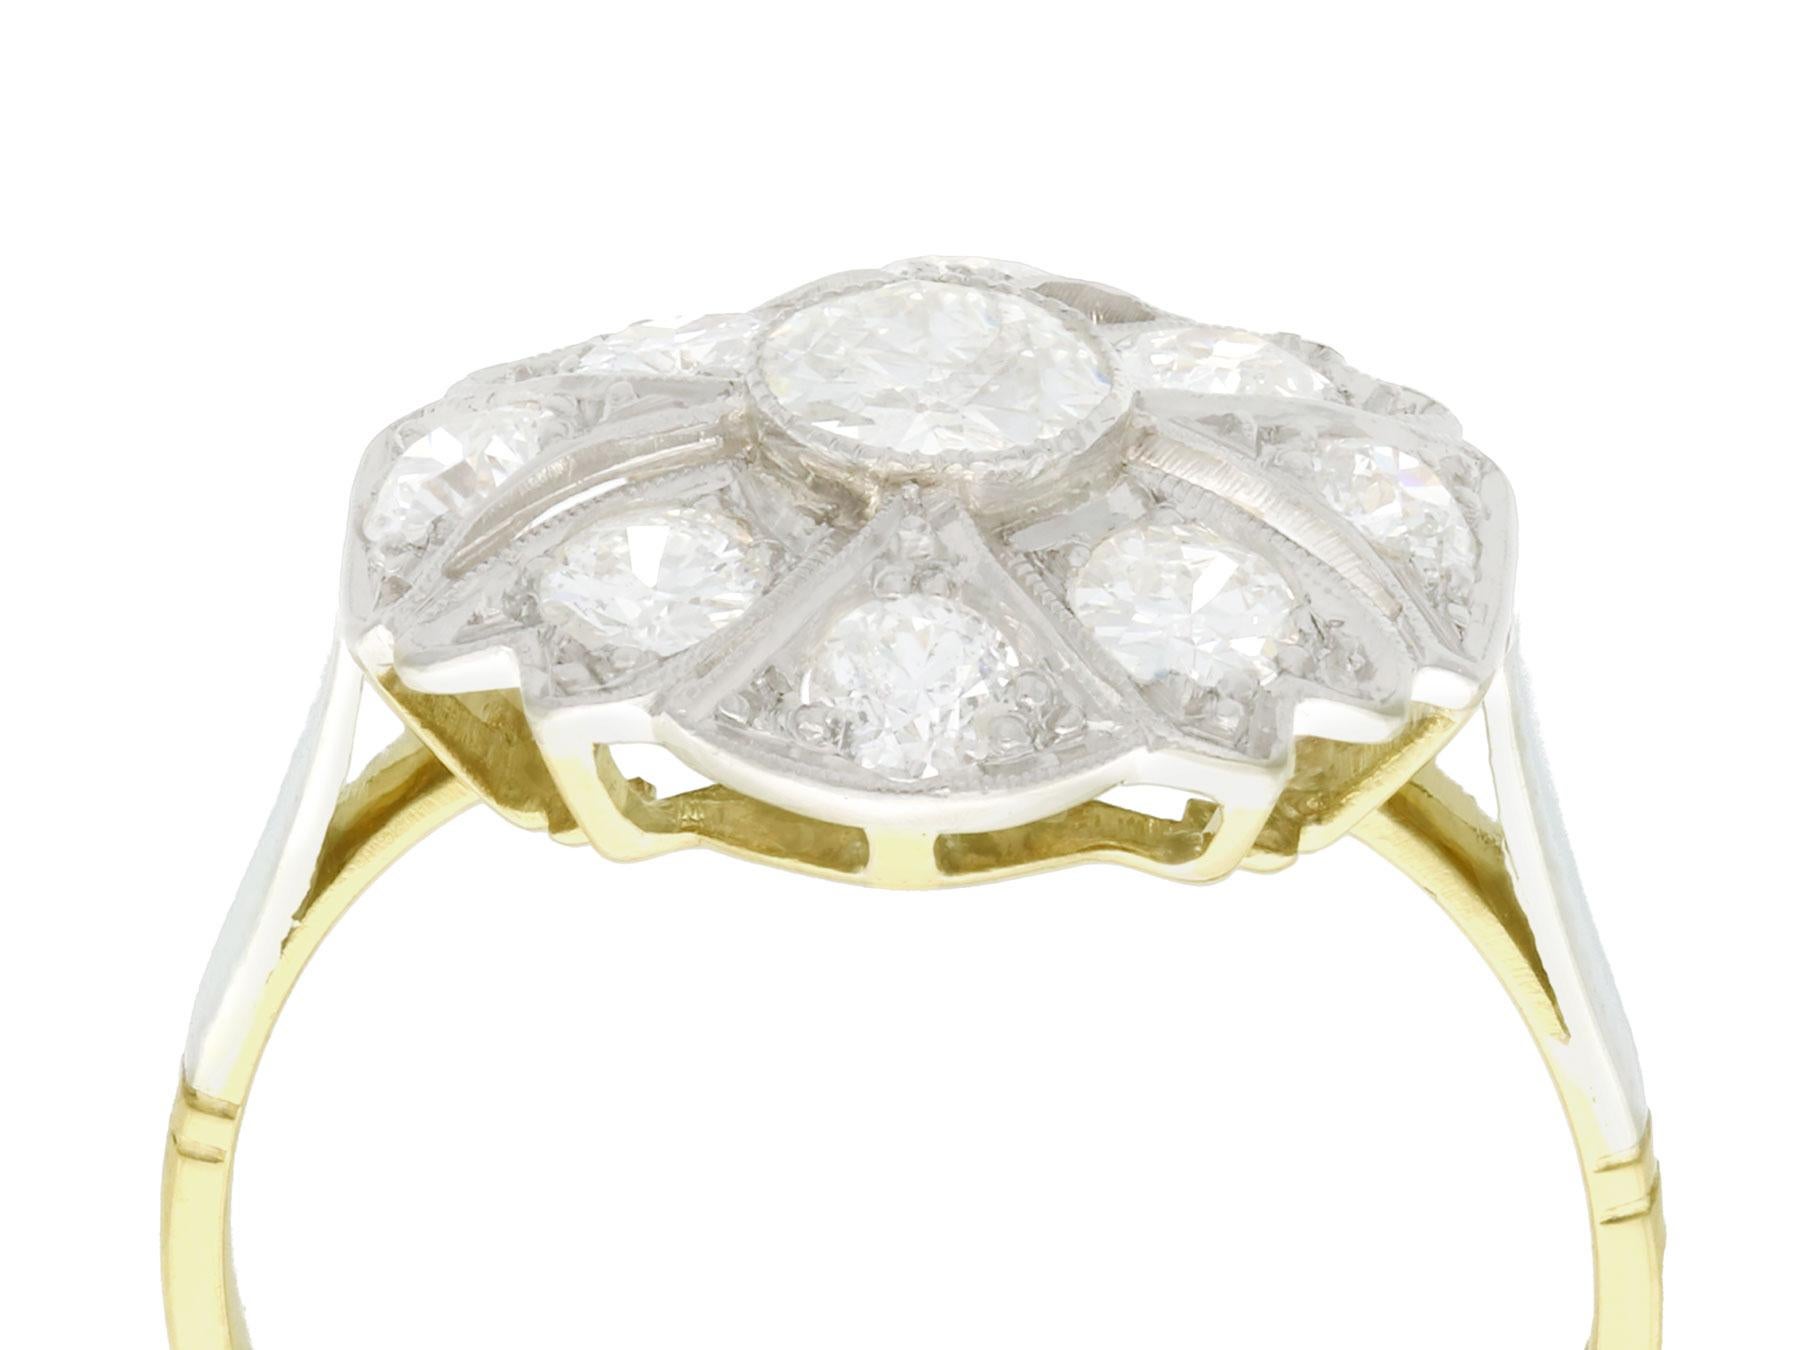 A stunning, fine and impressive antique Art Deco 1.42 carat diamond and 18 karat yellow gold, platinum set dress ring; part of our diverse antique estate jewelry collections.

This stunning, fine and impressive 1920s diamond ring has been crafted in